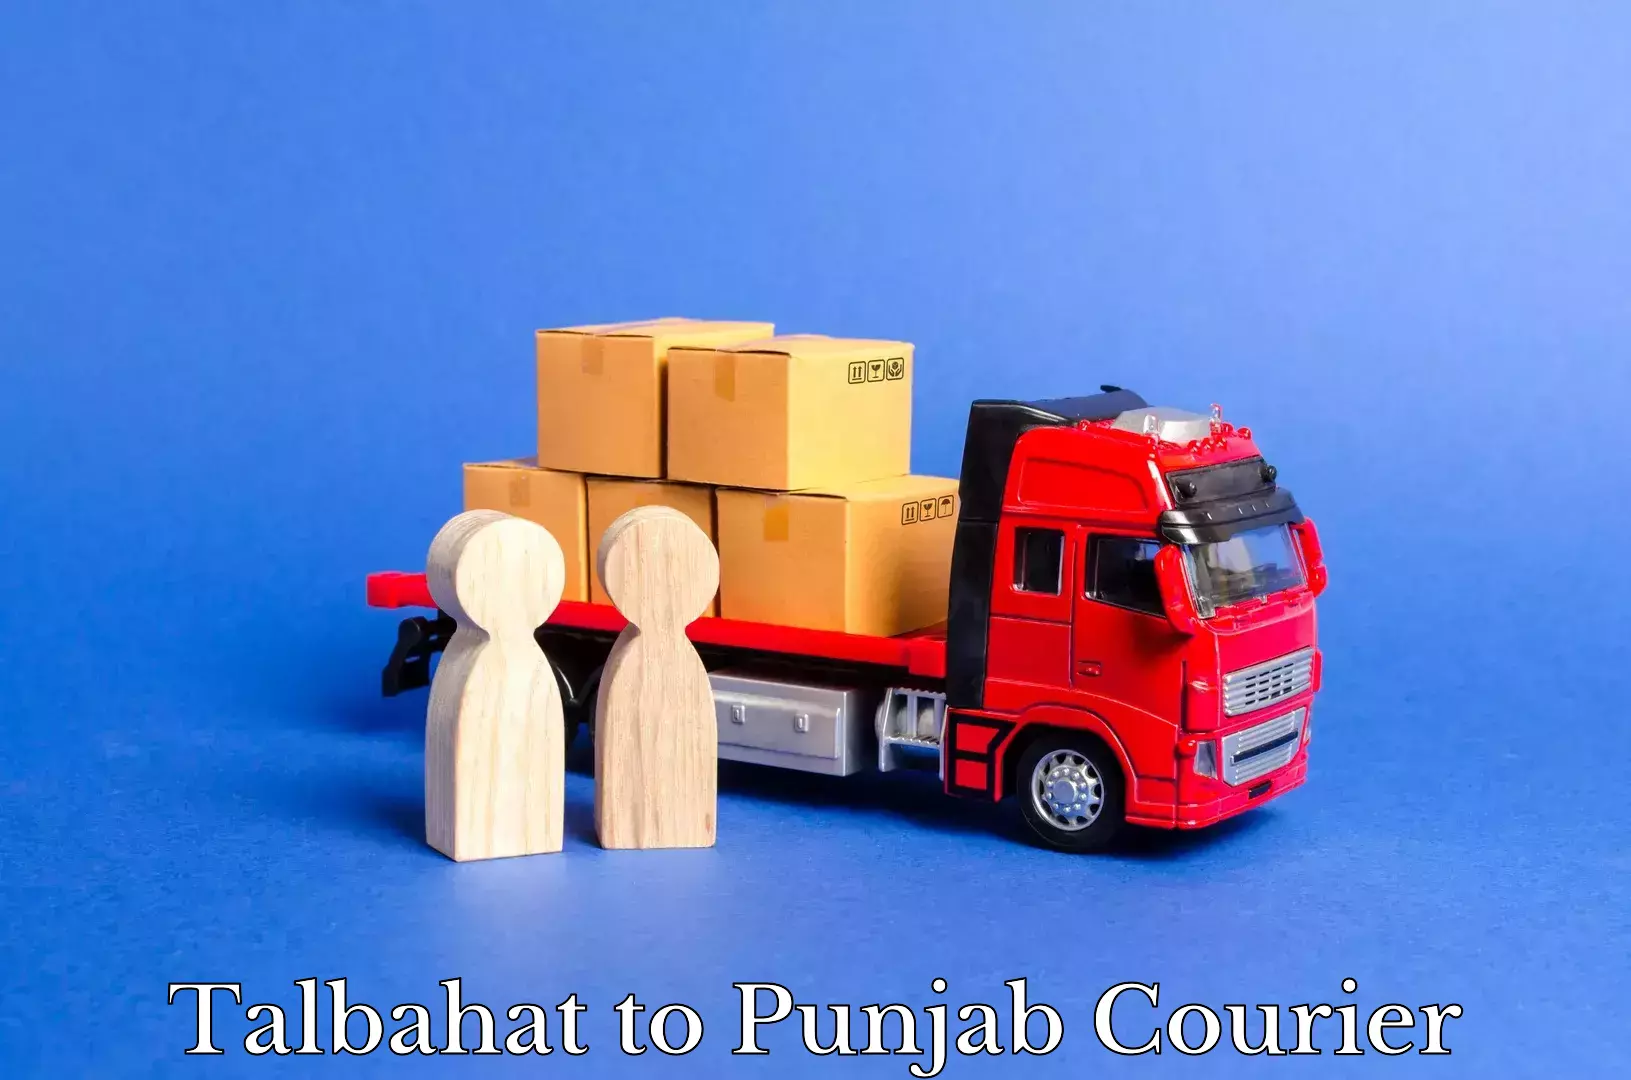 Remote area delivery in Talbahat to Punjab